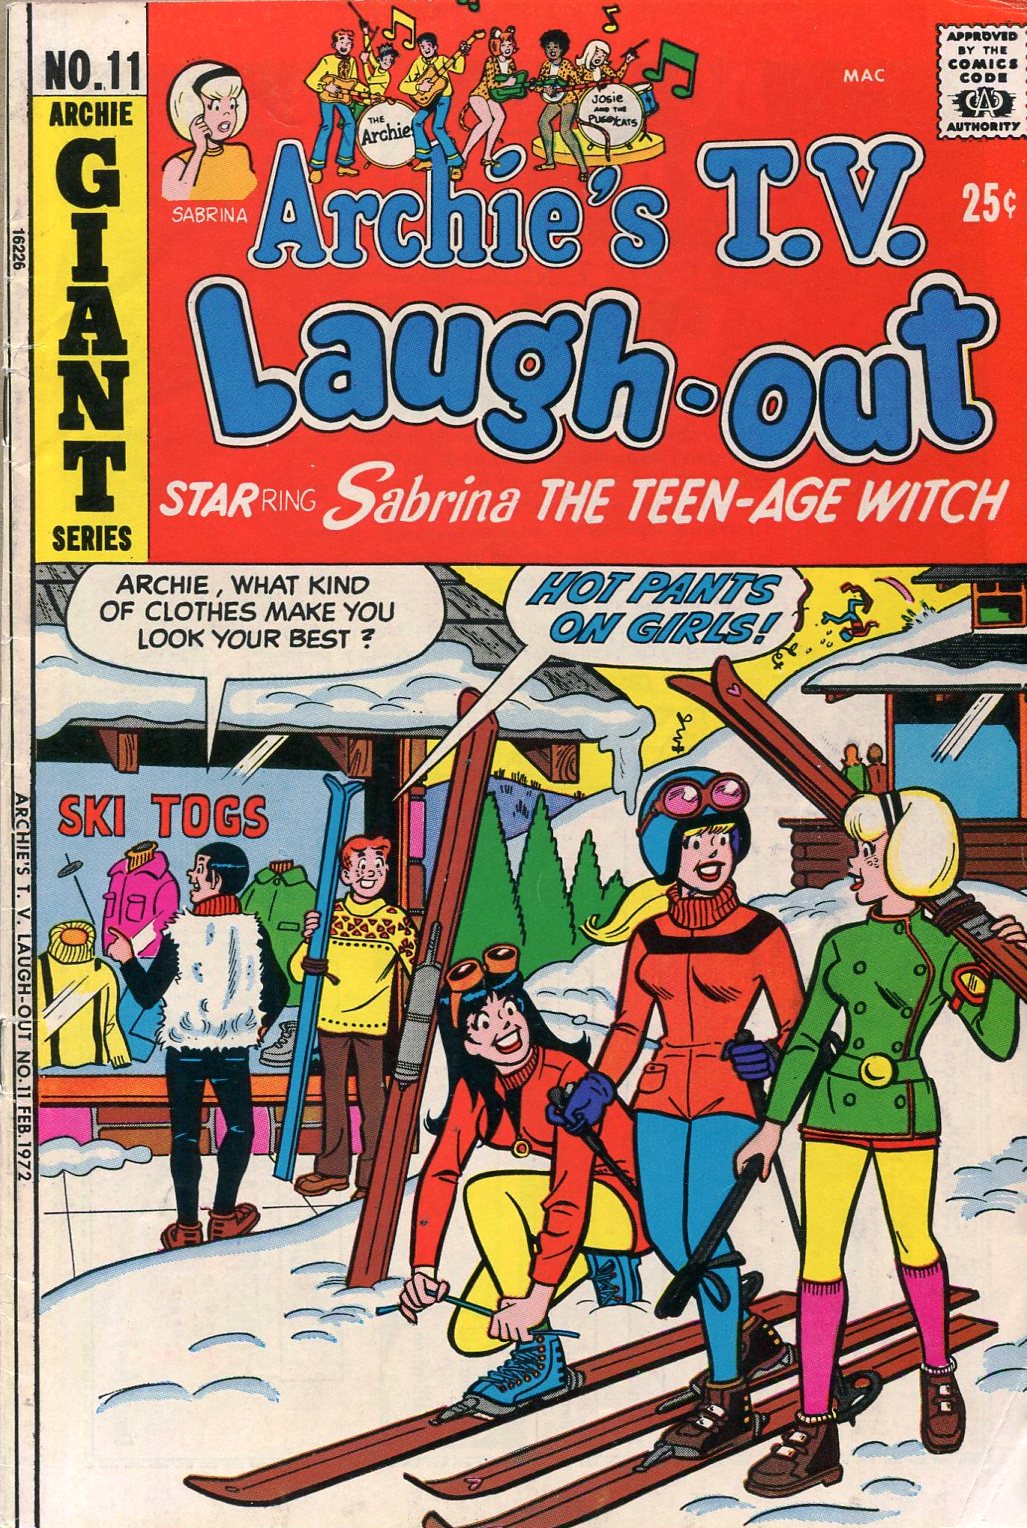 Read online Archie's TV Laugh-Out comic -  Issue #11 - 1